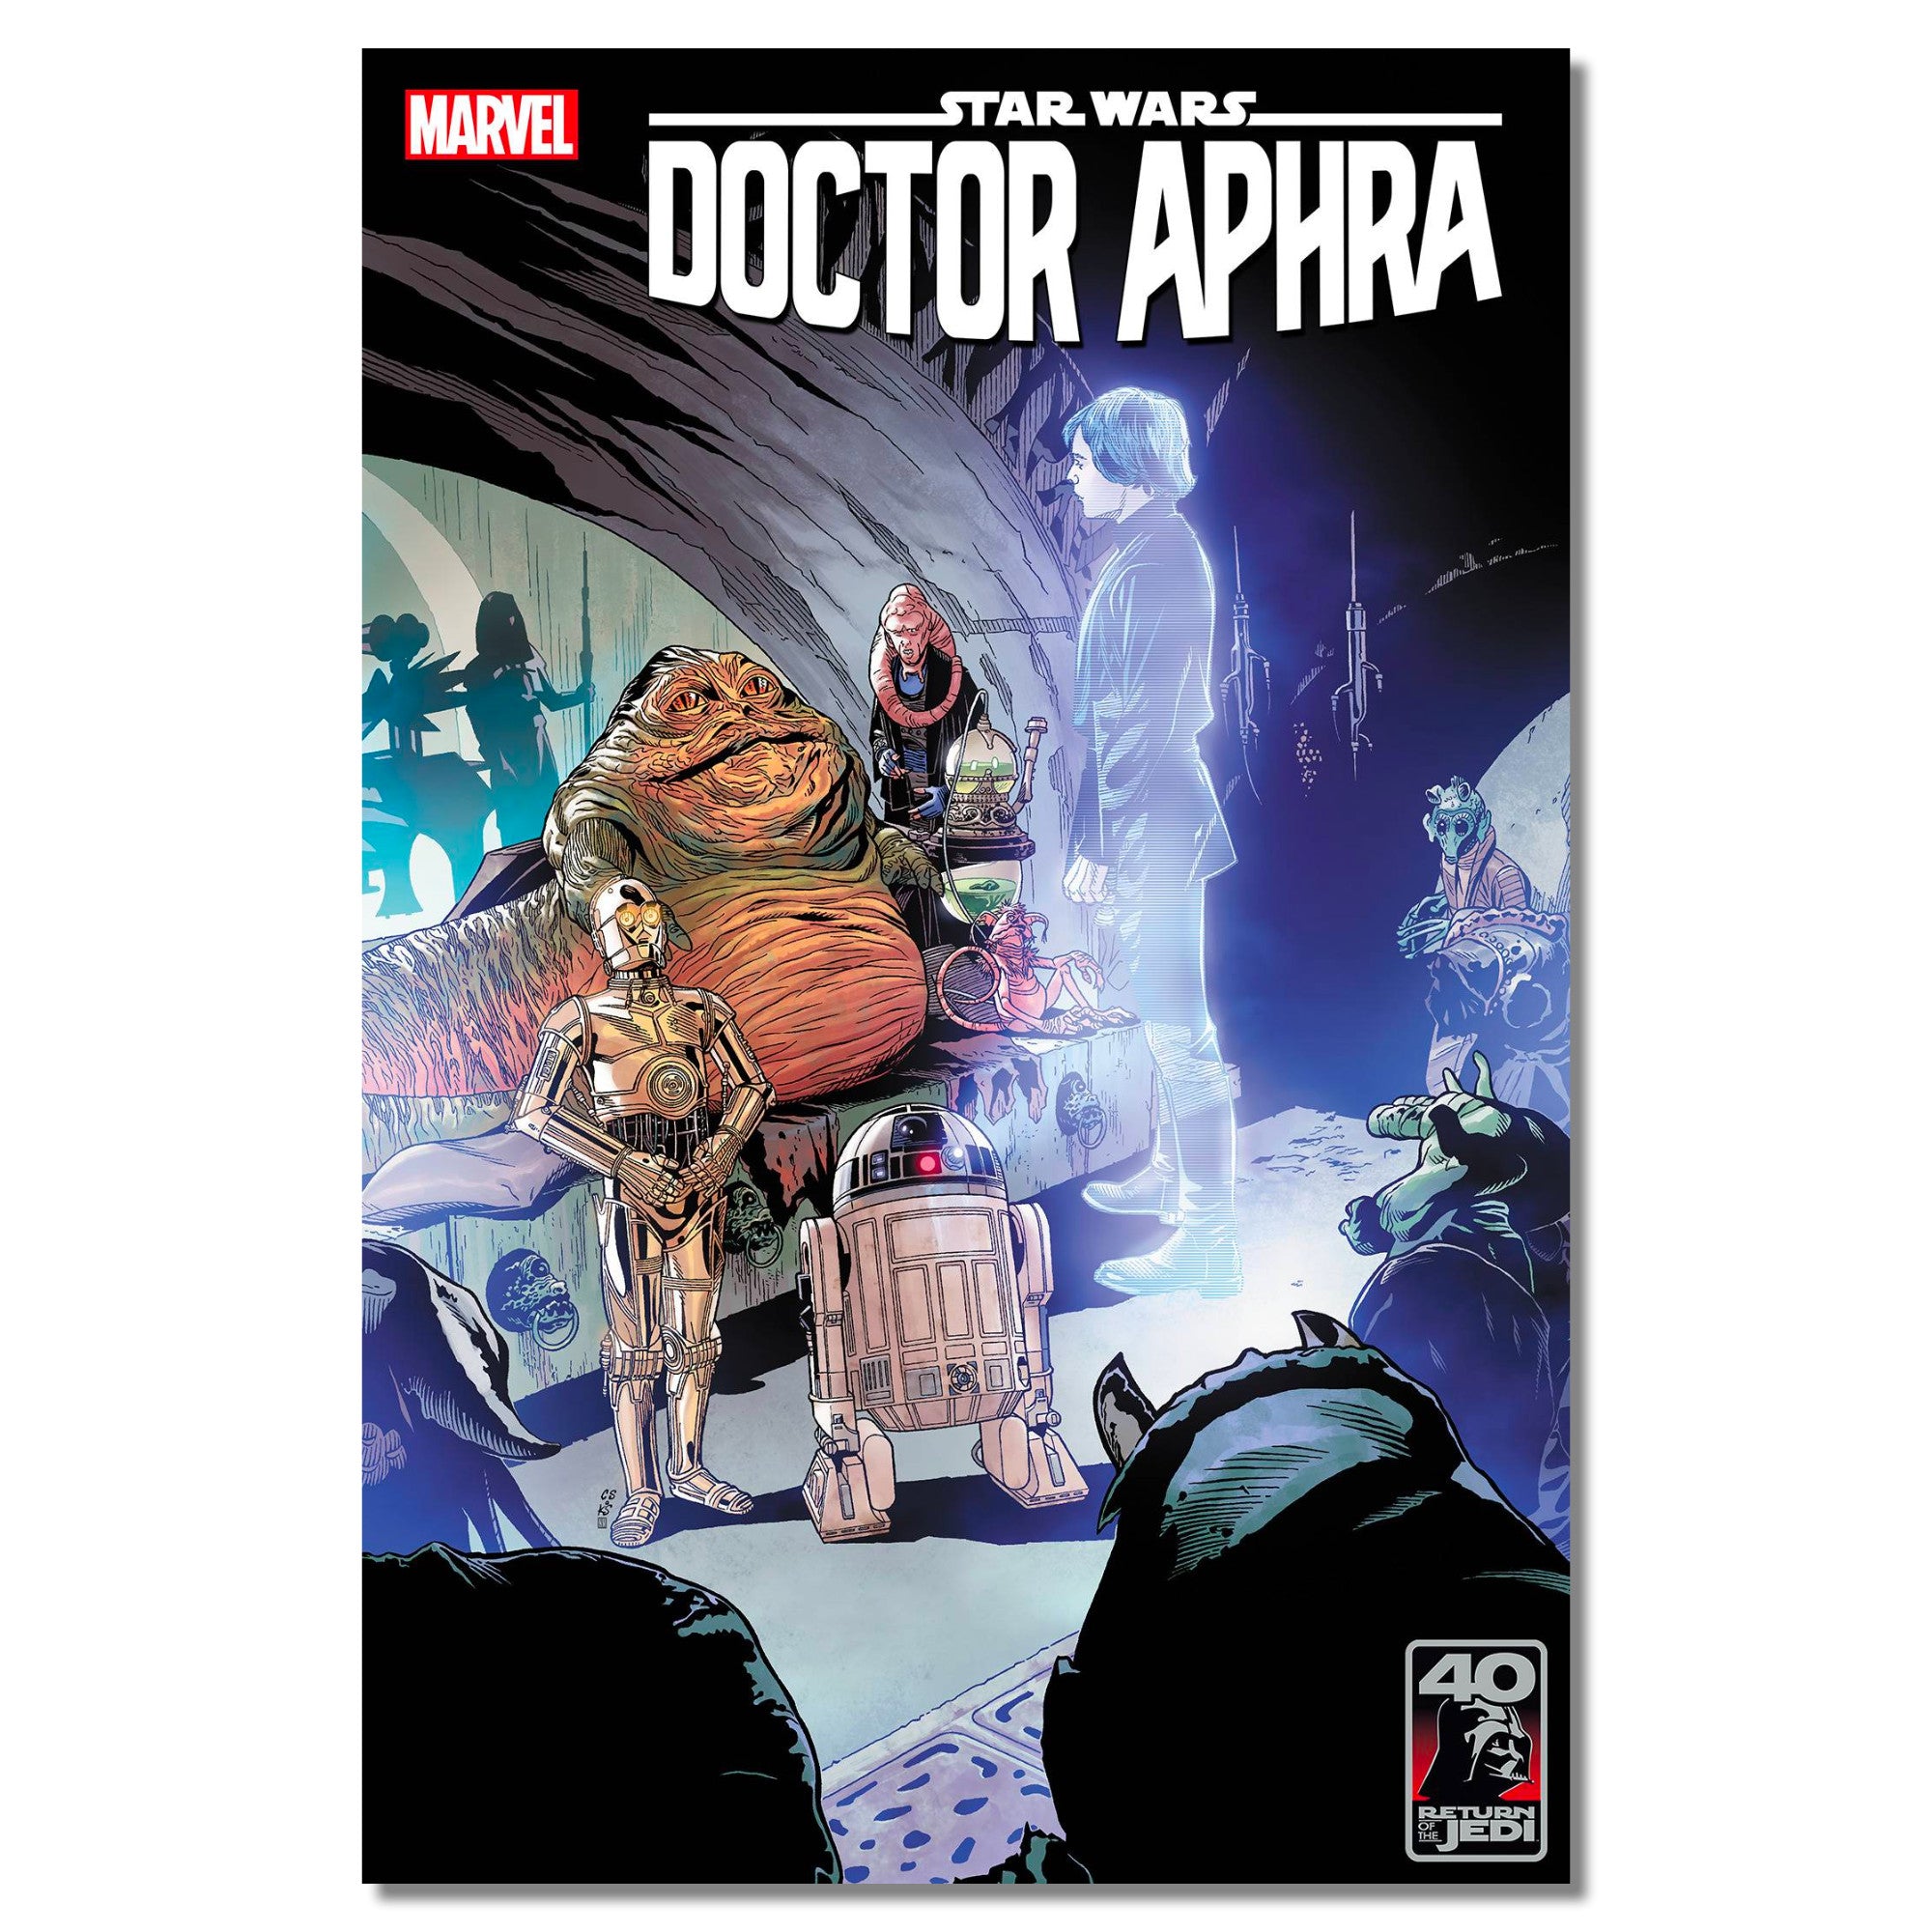 Star Wars Doctor Aphra #28 Return of the Jedi 40th Anniversary Variant FINALSALE